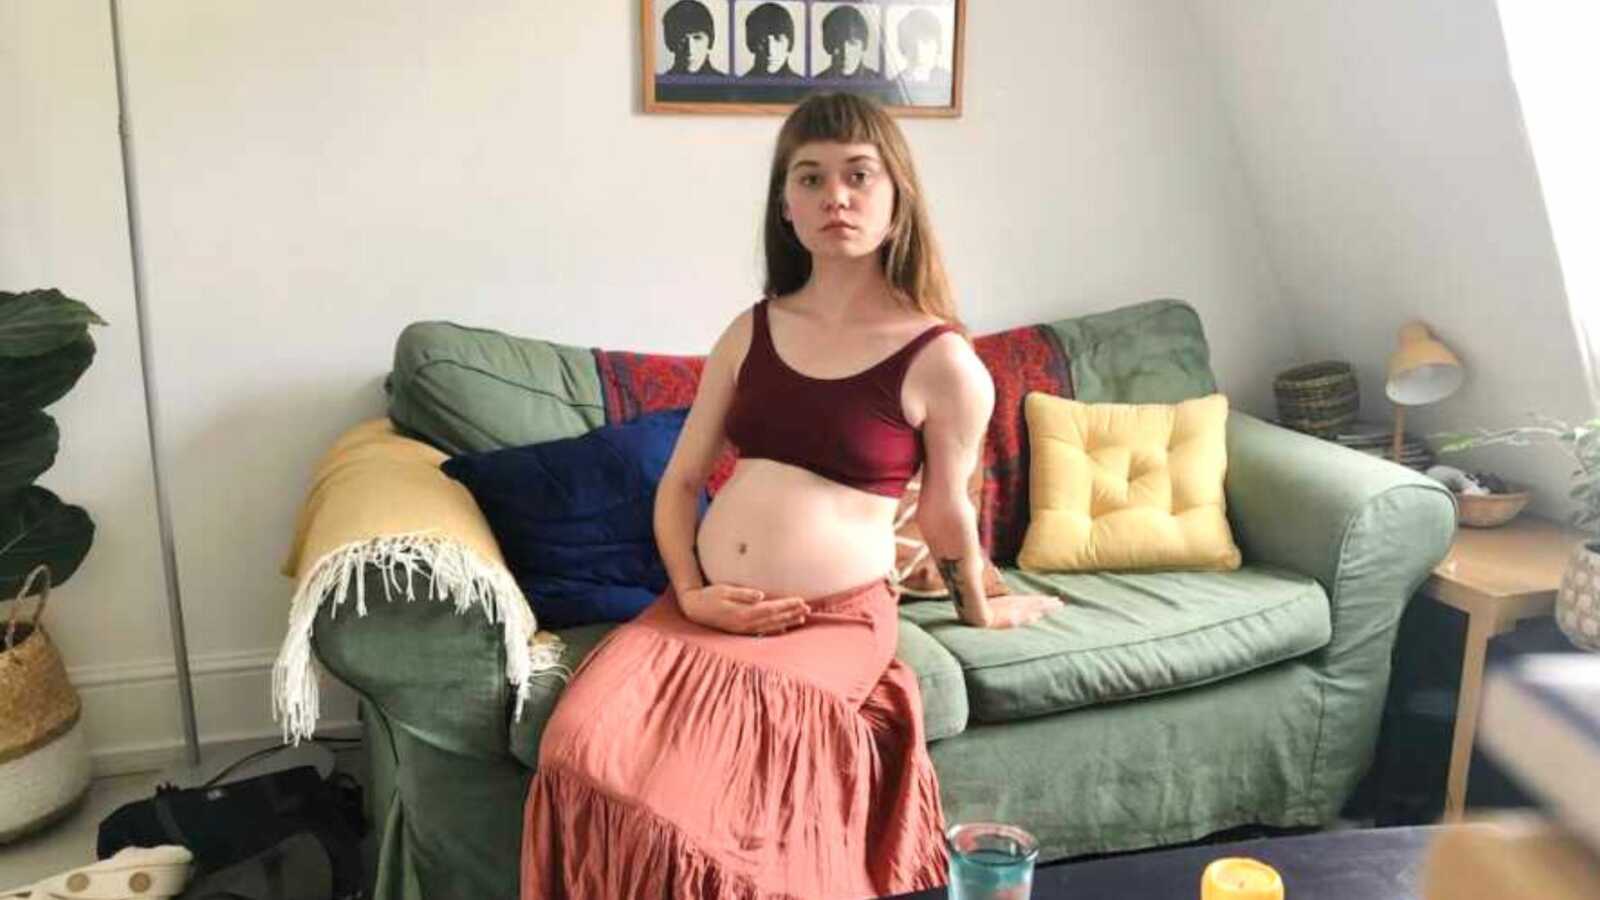 woman with endometriosis sits on couch holding stomach